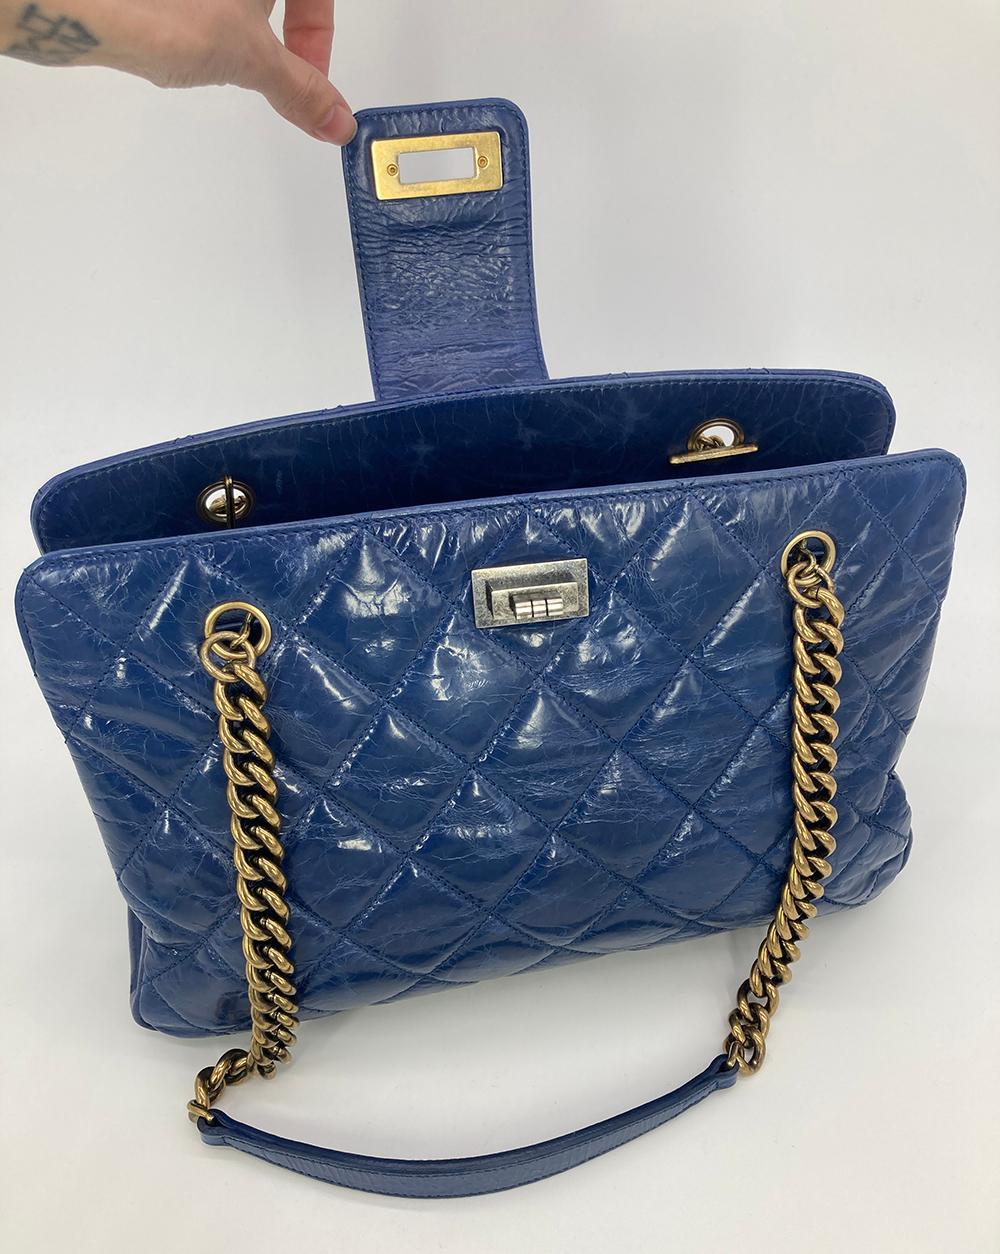 Chanel Blue Glazed Calfskin Quilted Tote Bag For Sale 2